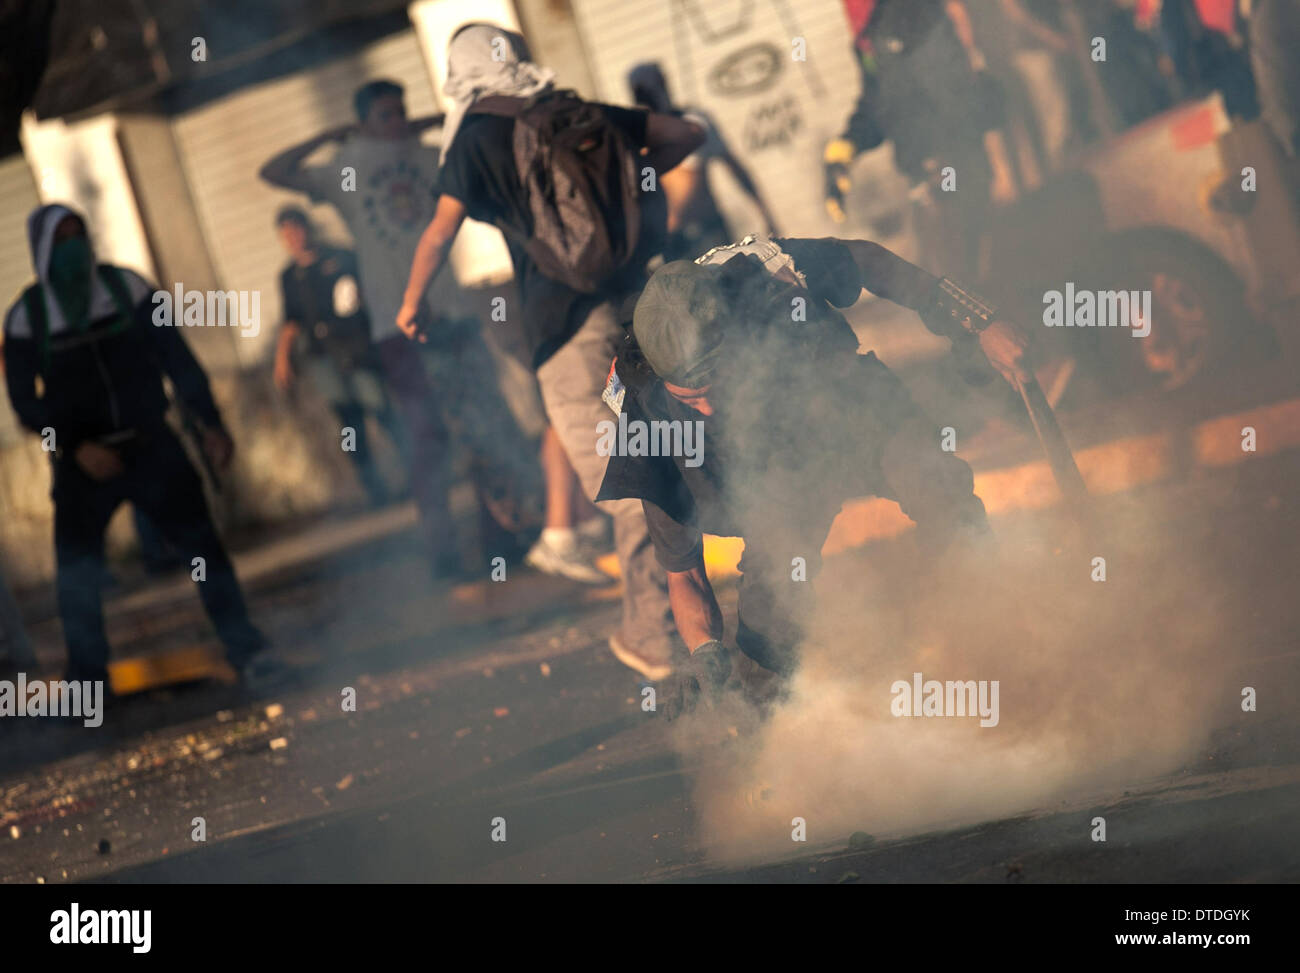 Caracas, Venezuela. 15th Feb, 2014. Students and riot police clash during a protest by government opponents, in the city of Caracas, capital of Venezuela, on Feb. 15, 2014. Credit:  Boris Vergara/Xinhua/Alamy Live News Stock Photo